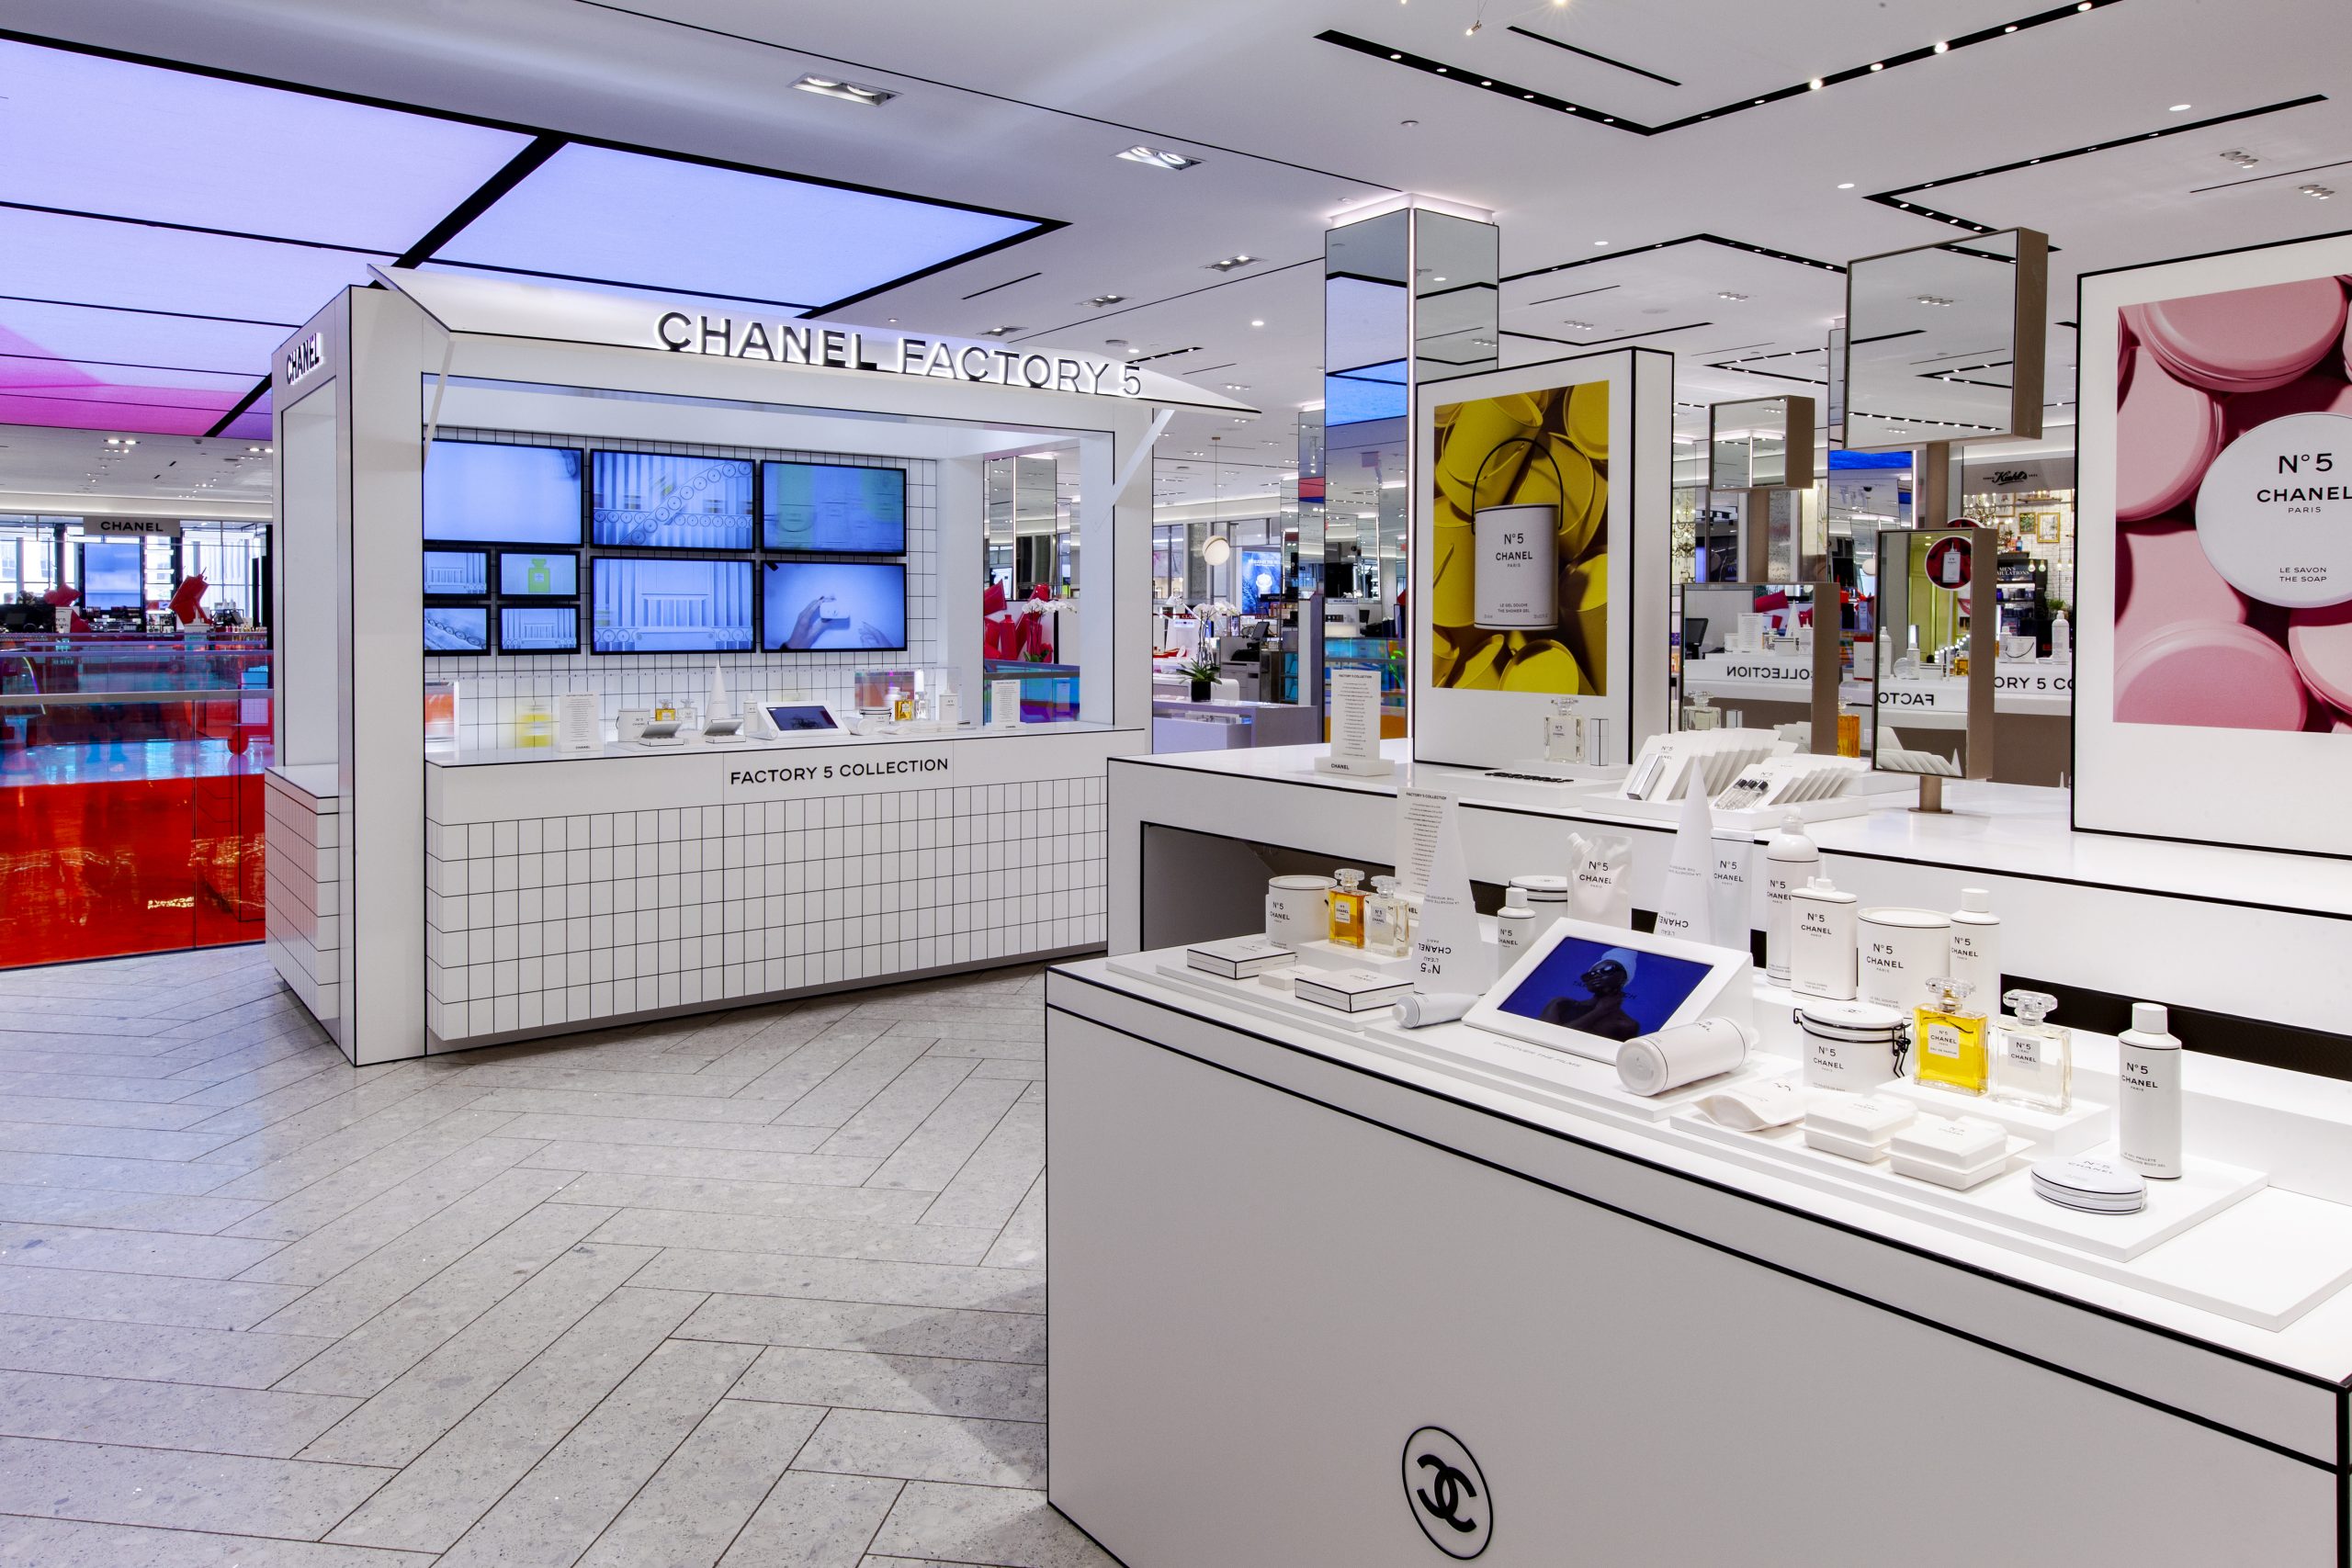 Chanel inks exclusive . deal with Saks for Factory 5 launch